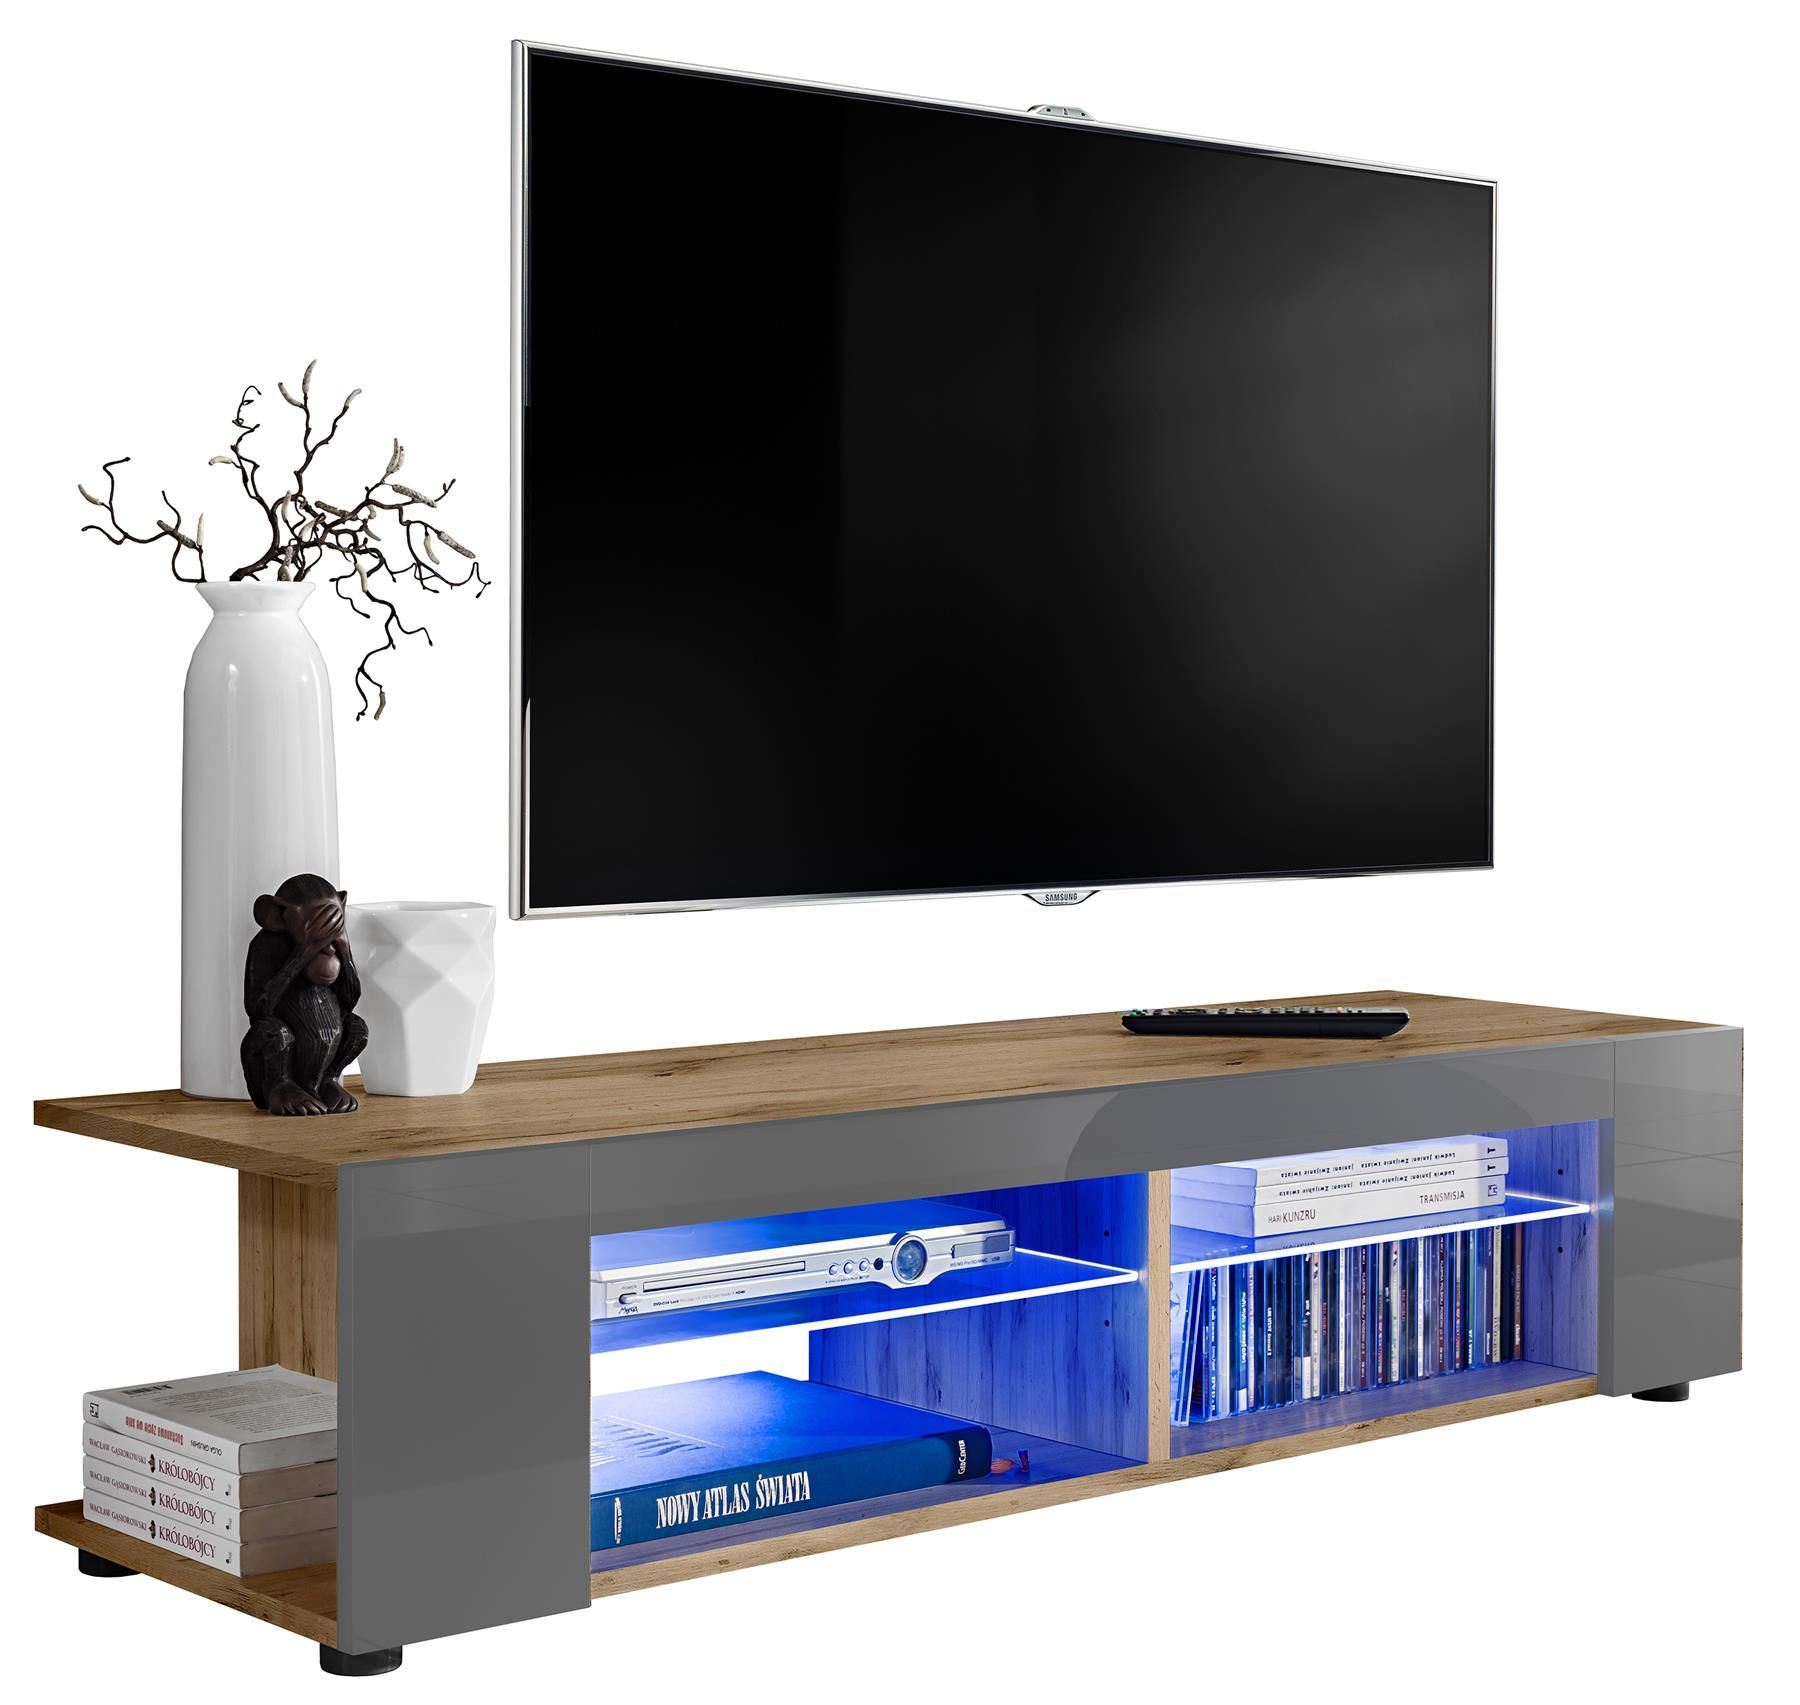 Tv Stand Cabinet Led Shelf Entertainment Media Center Throughout Zimtown Modern Tv Stands High Gloss Media Console Cabinet With Led Shelf And Drawers (View 4 of 15)